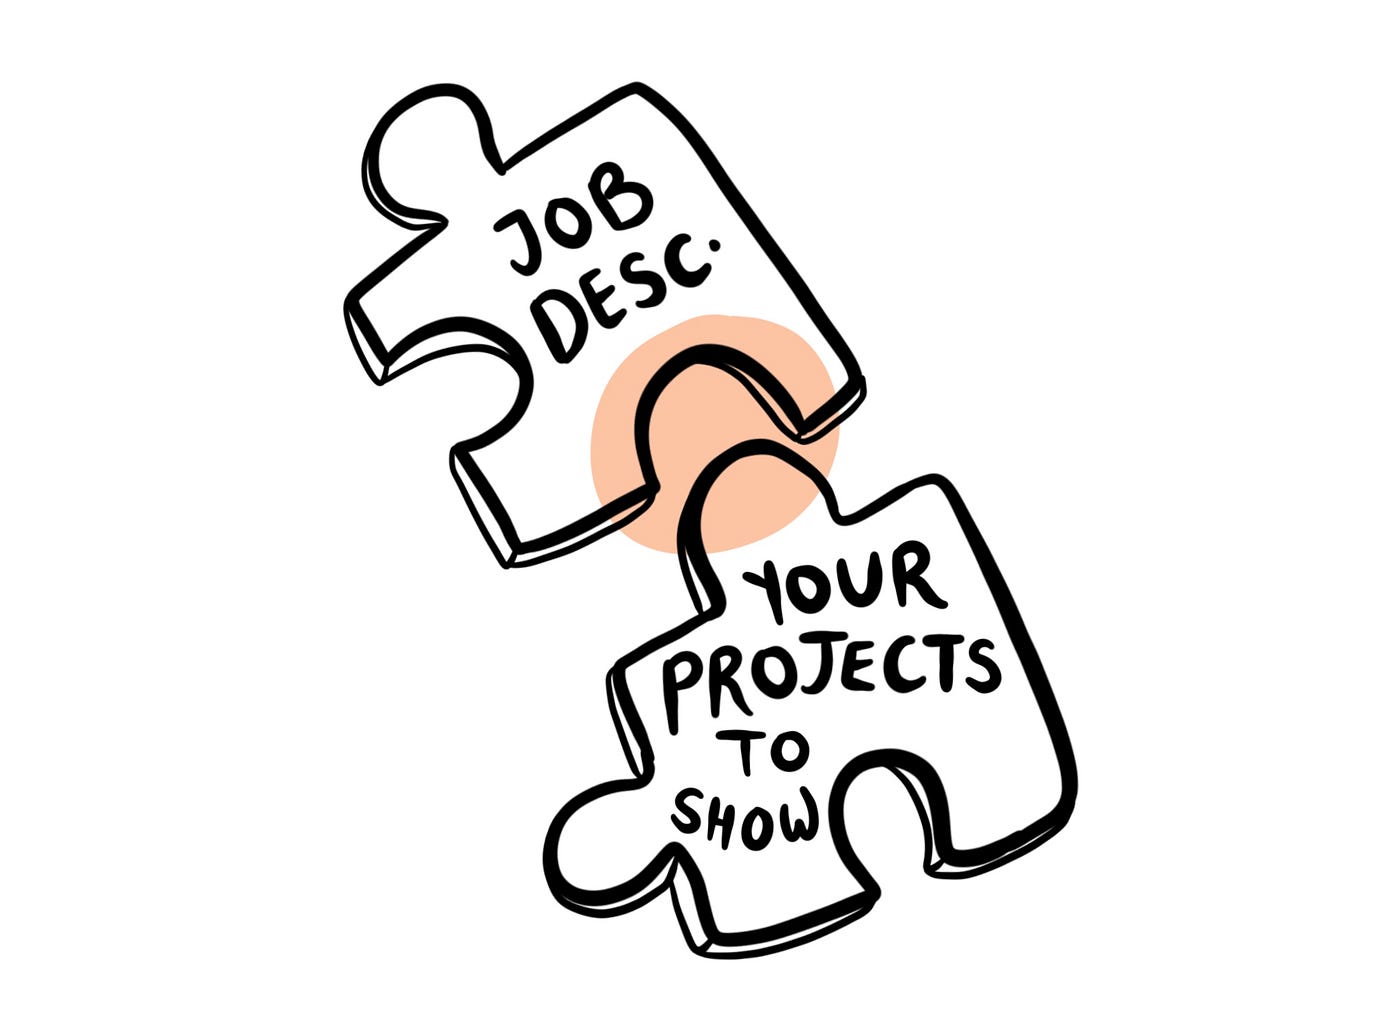 A puzzle showing “Job description” on one end and “Your projects to show” on another end